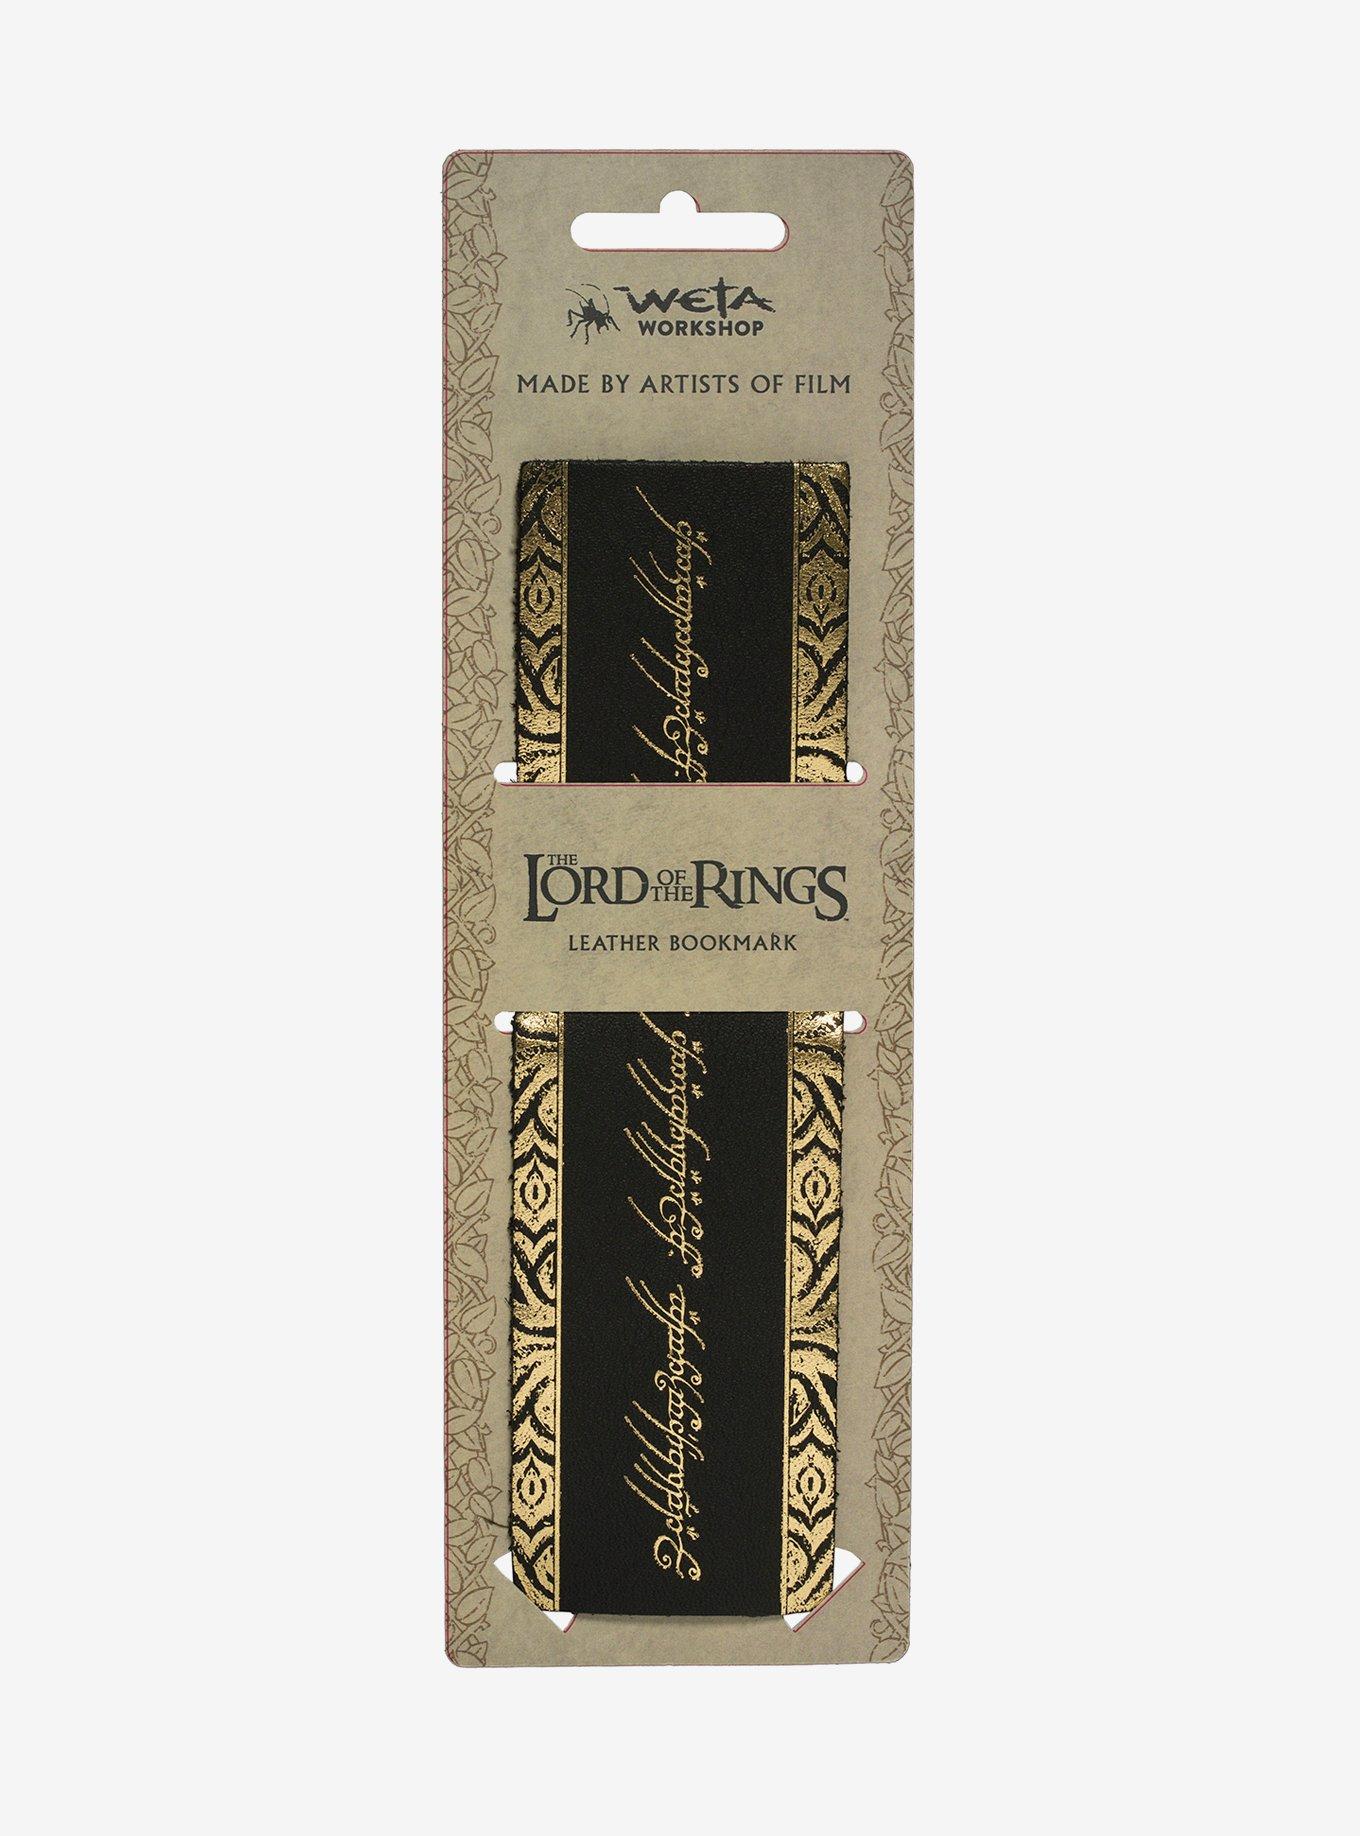 The Lord Of The Rings Leather Bookmark